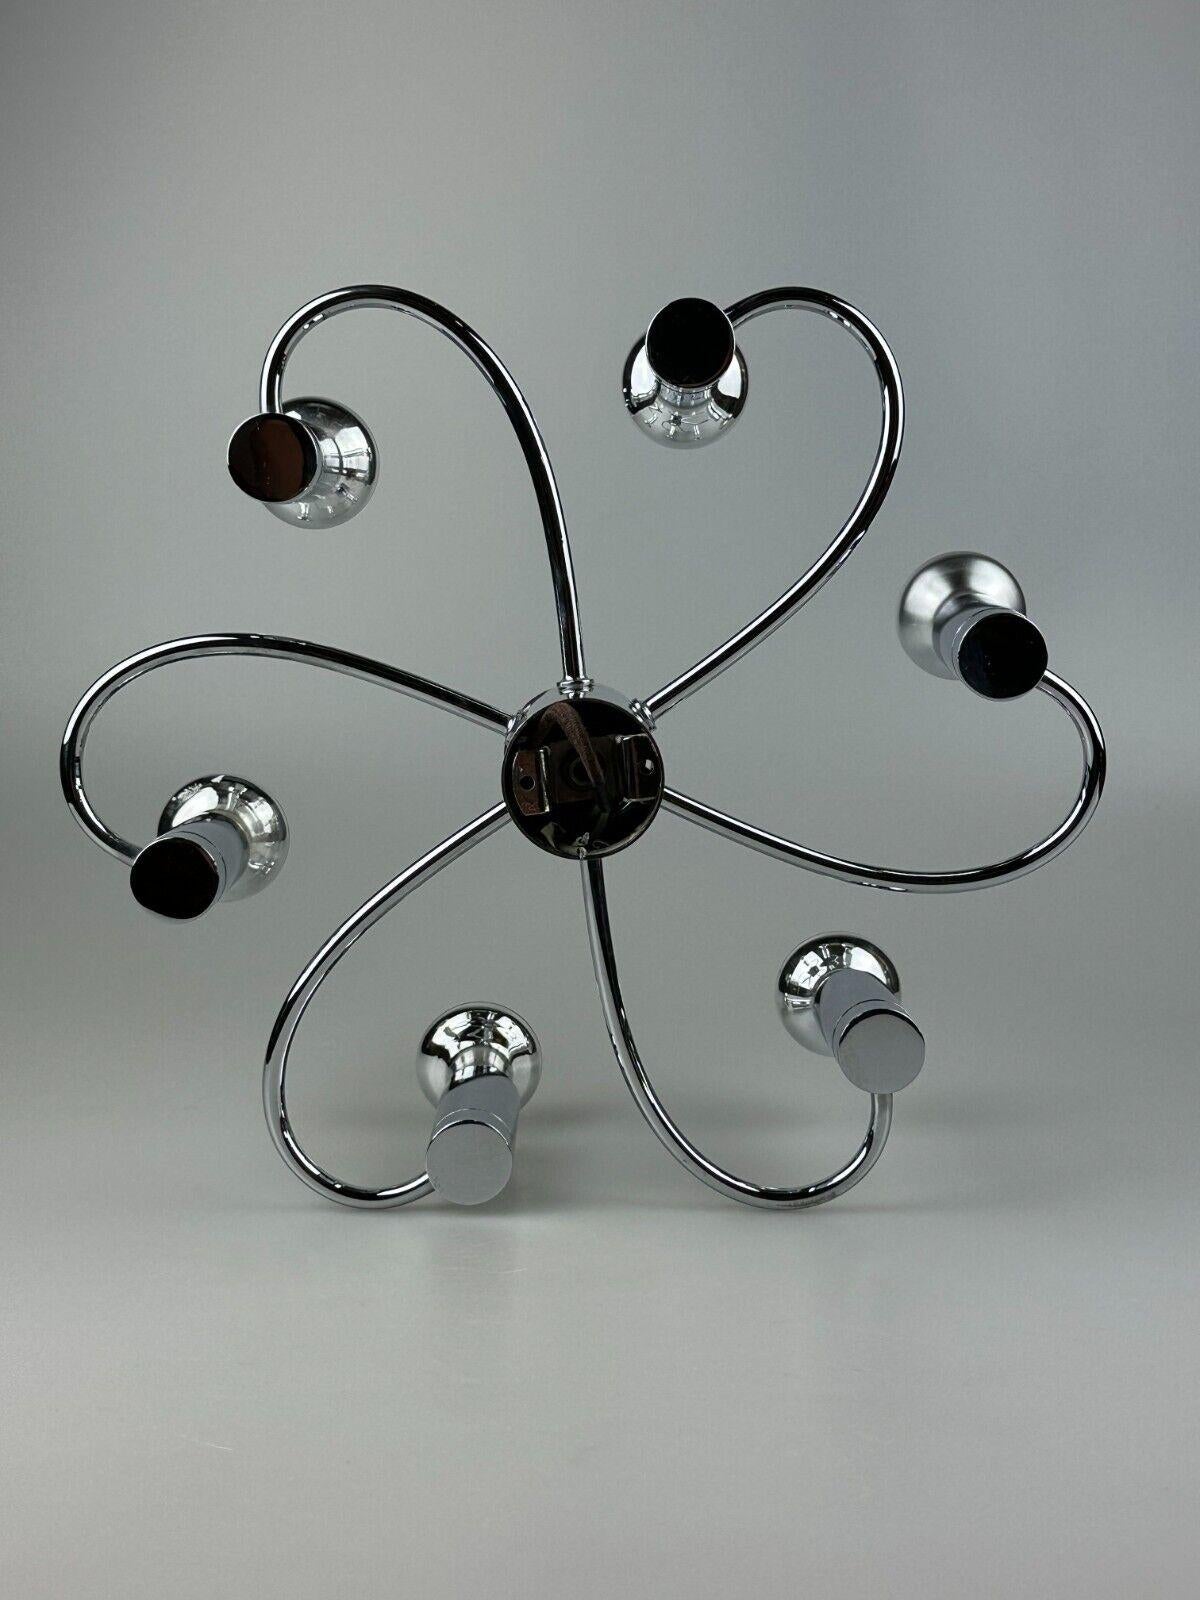 60s 70s Sputnik wall lamp or ceiling lamp by Cosack Leuchten Chrom For Sale 5